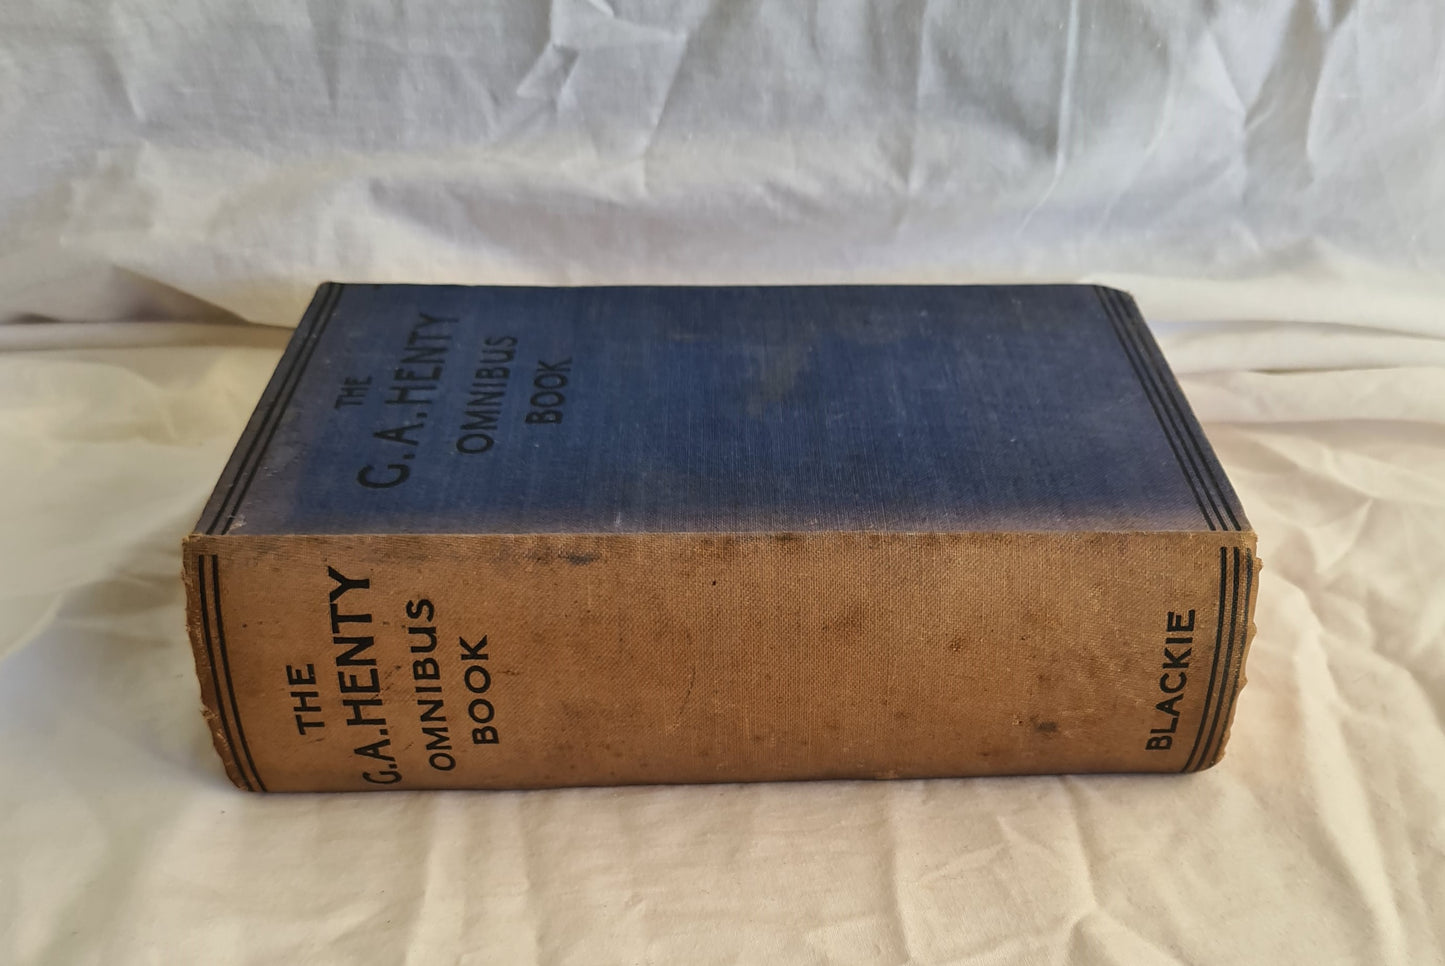 The G. A. Henty Omnibus Book by G. A. Henty